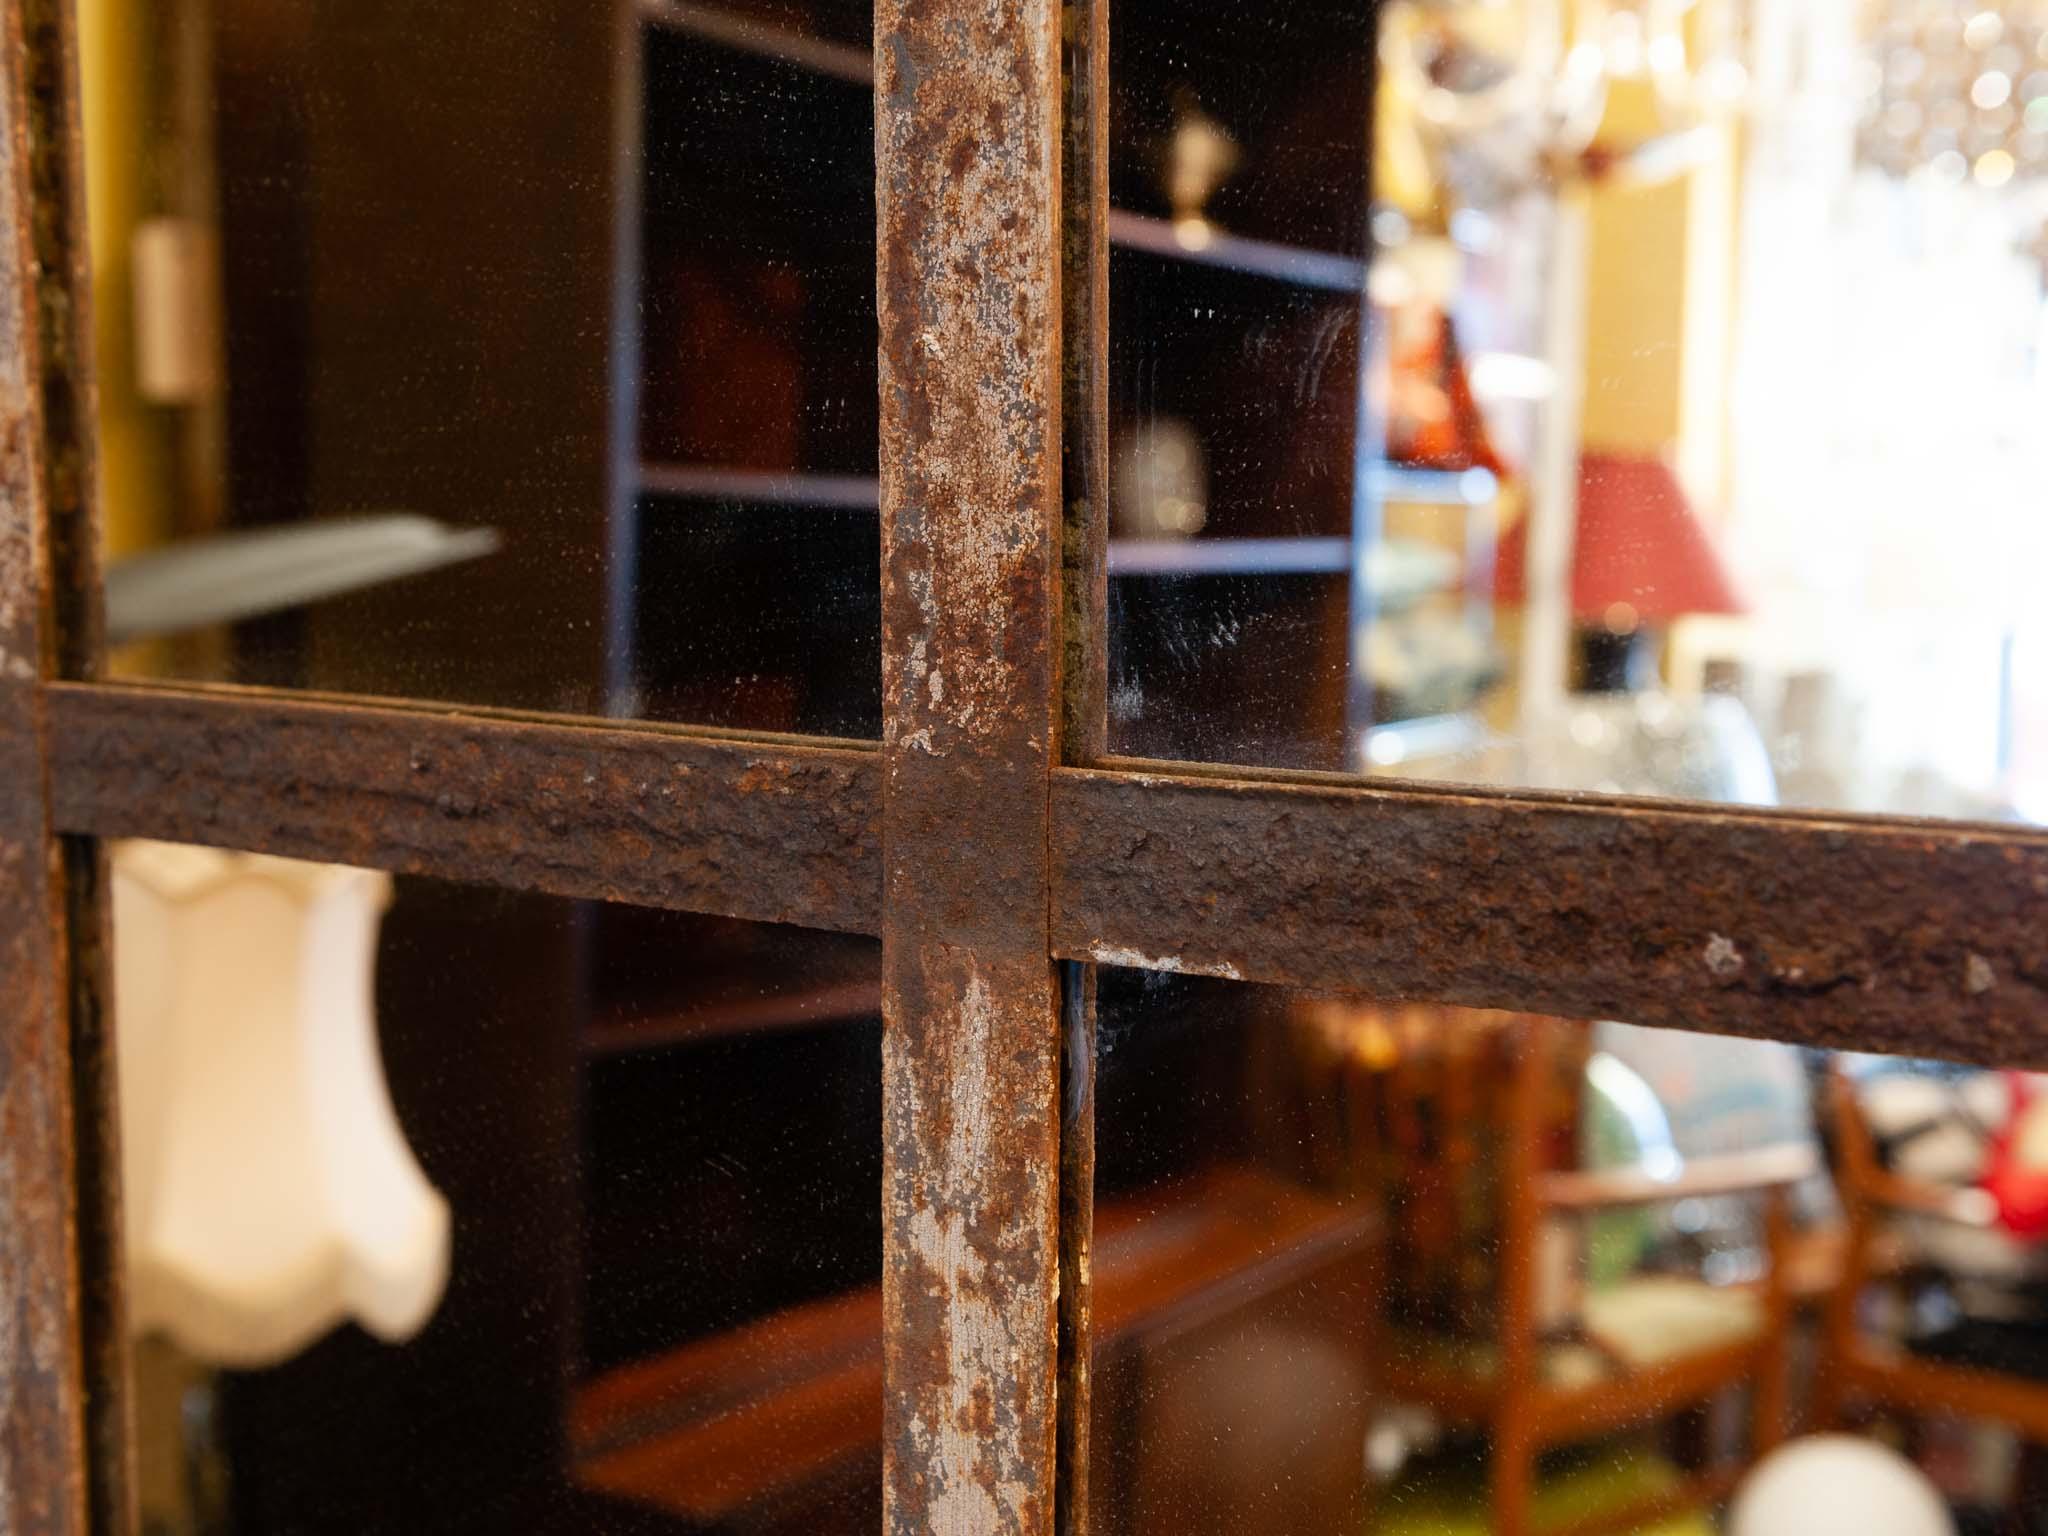 Large vintage French industrial rustic disused factory window wall mirror. The iron window-frame was reclaimed from a factory in France and converted to this amazing wall mirror. The patina of the frame is wonderfully warm, aged, rustic and rusty